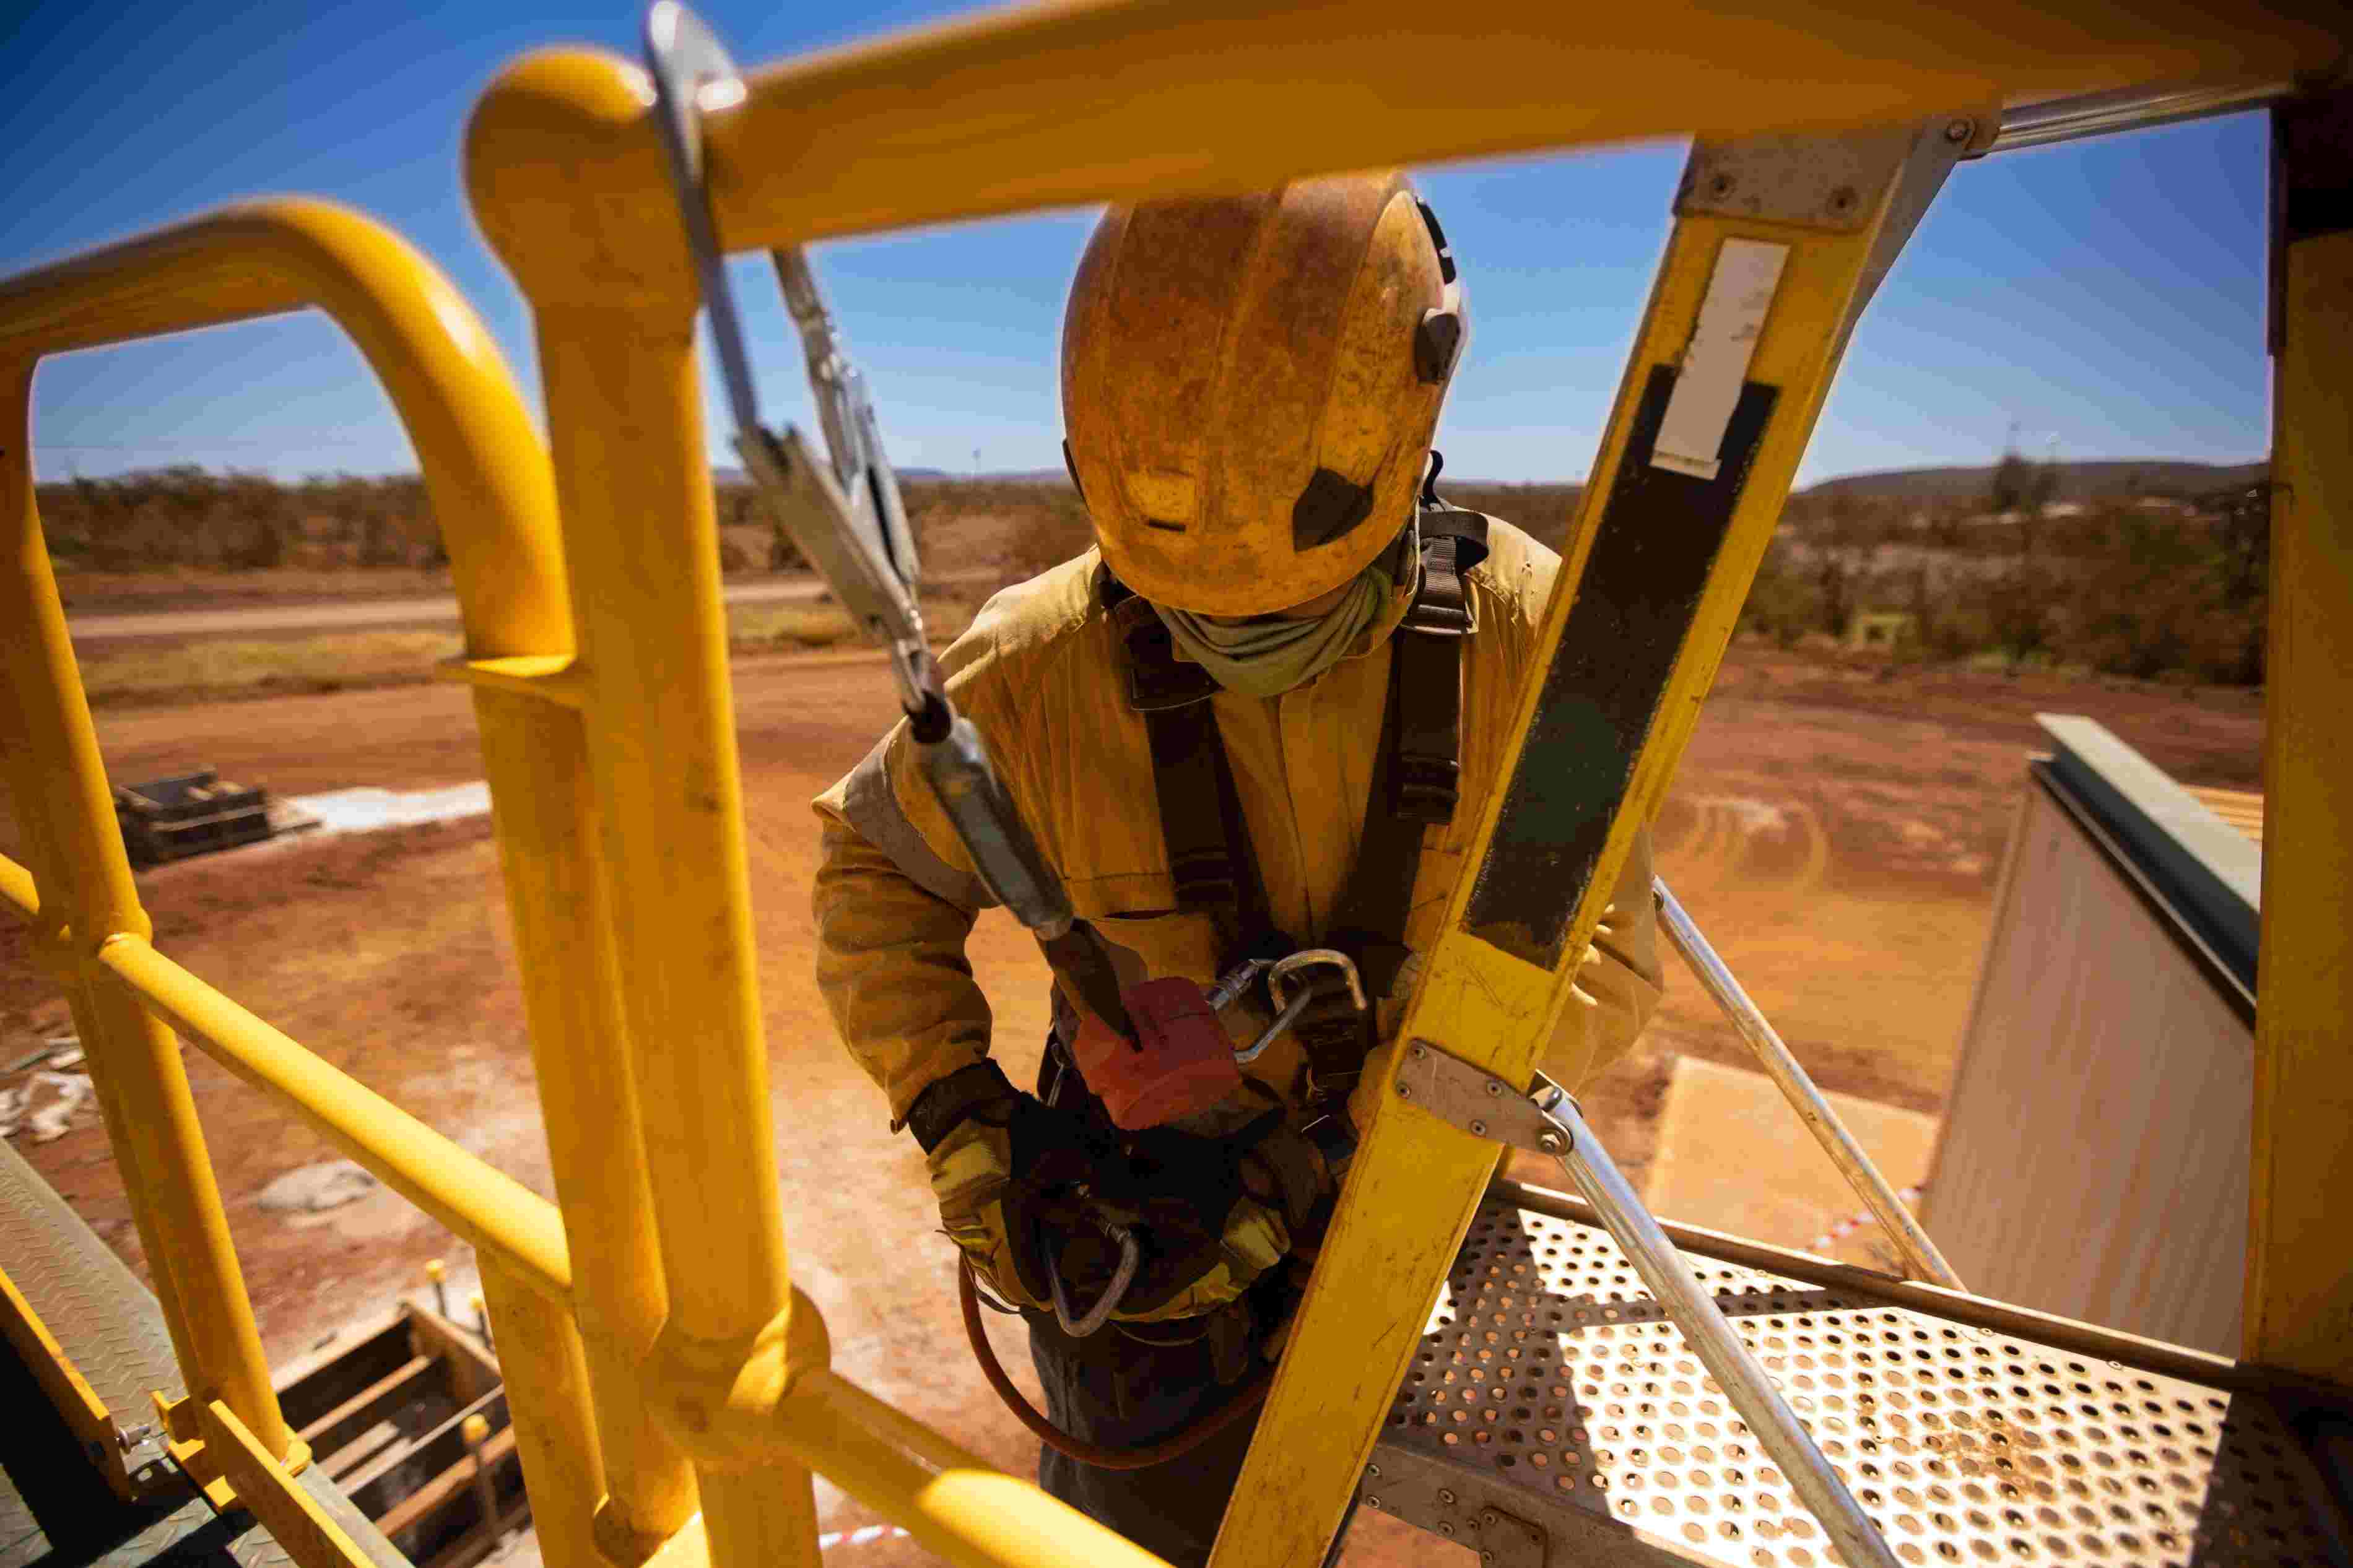 Fall Protection Training Online: Ensuring Safety from Anywhere